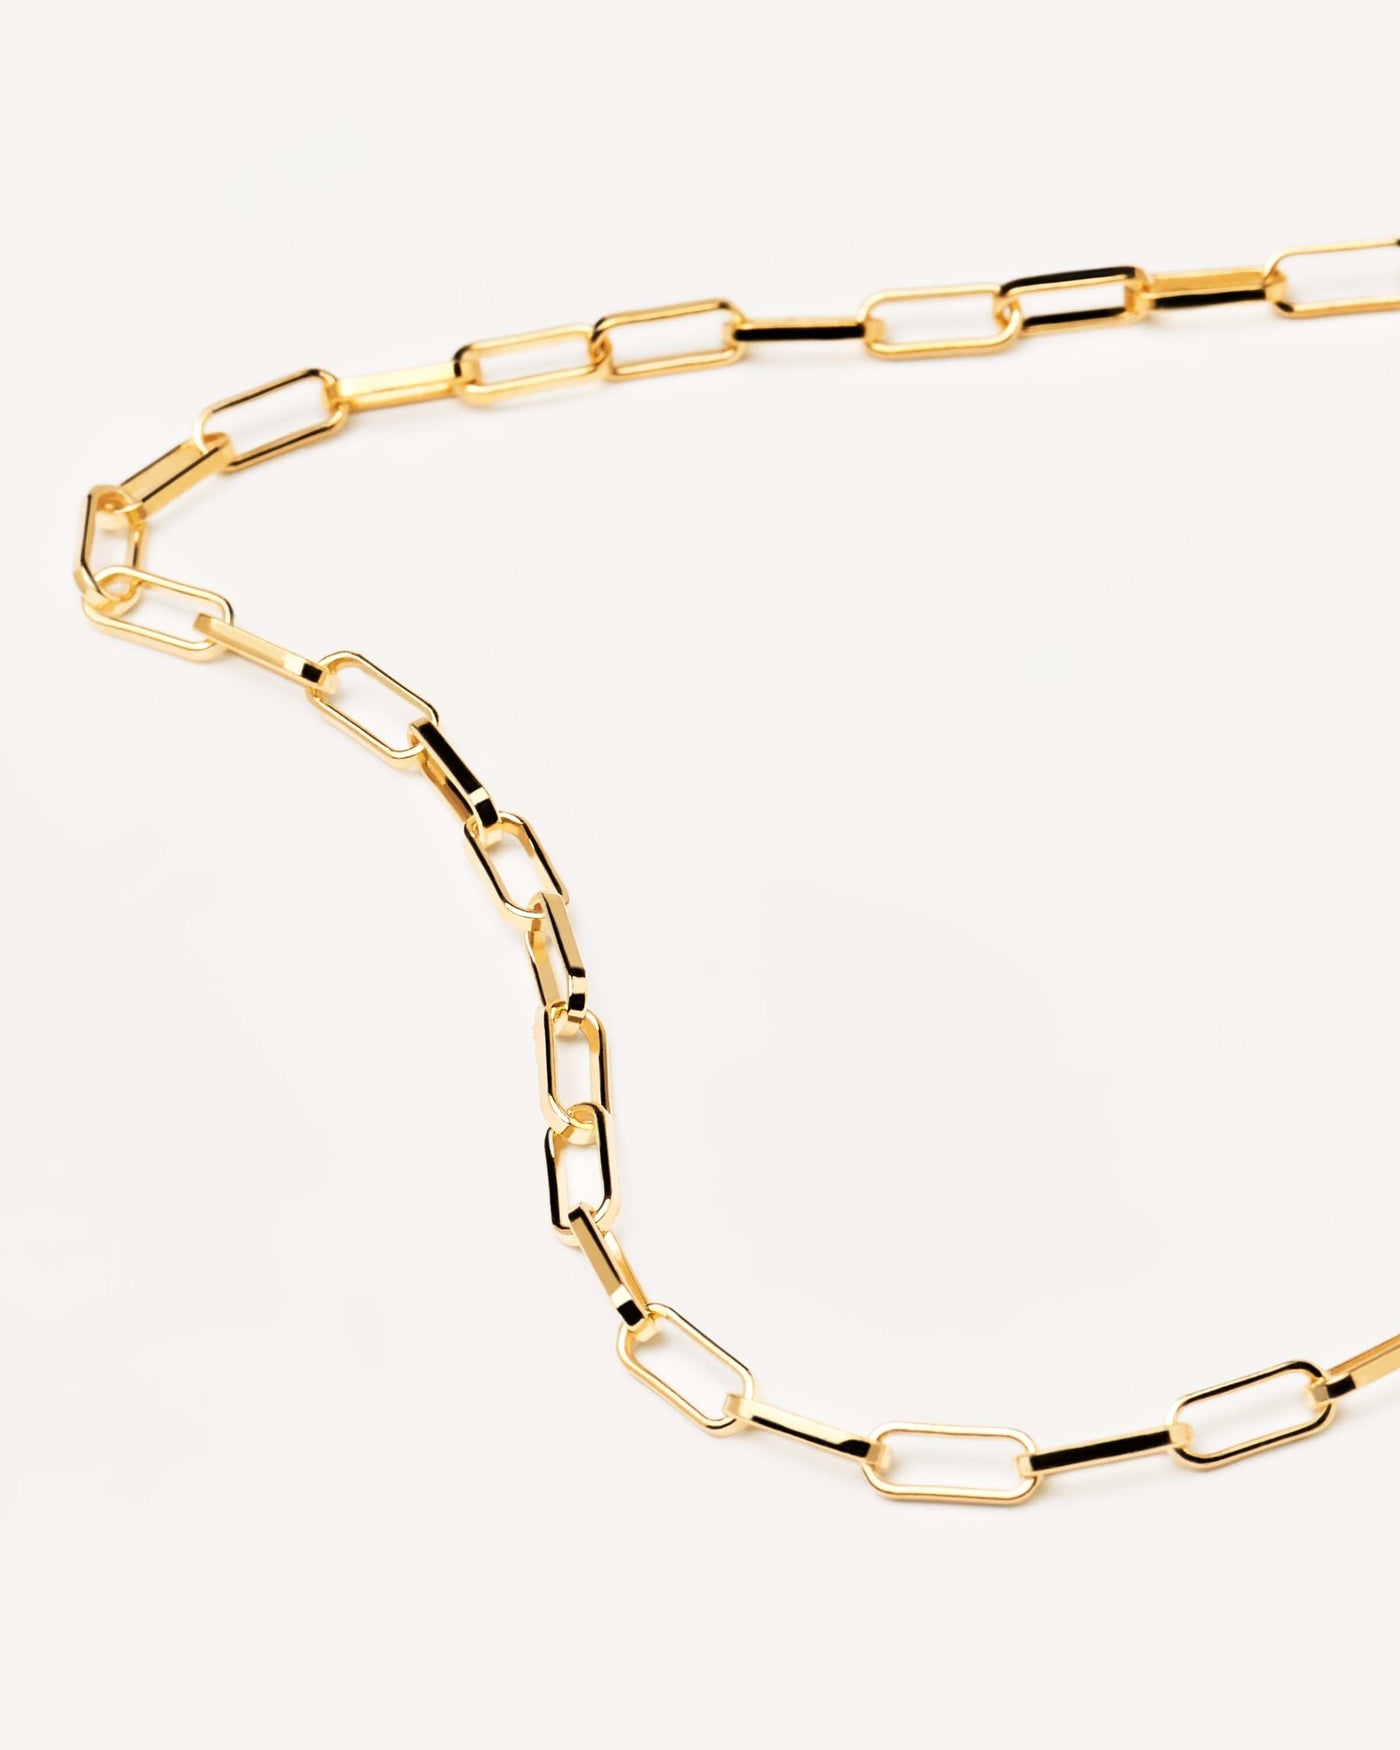 2023 Selection | Statement Necklace. Elongated oval shaped link chain in 18k gold plated silver. Get the latest arrival from PDPAOLA. Place your order safely and get this Best Seller. Free Shipping.